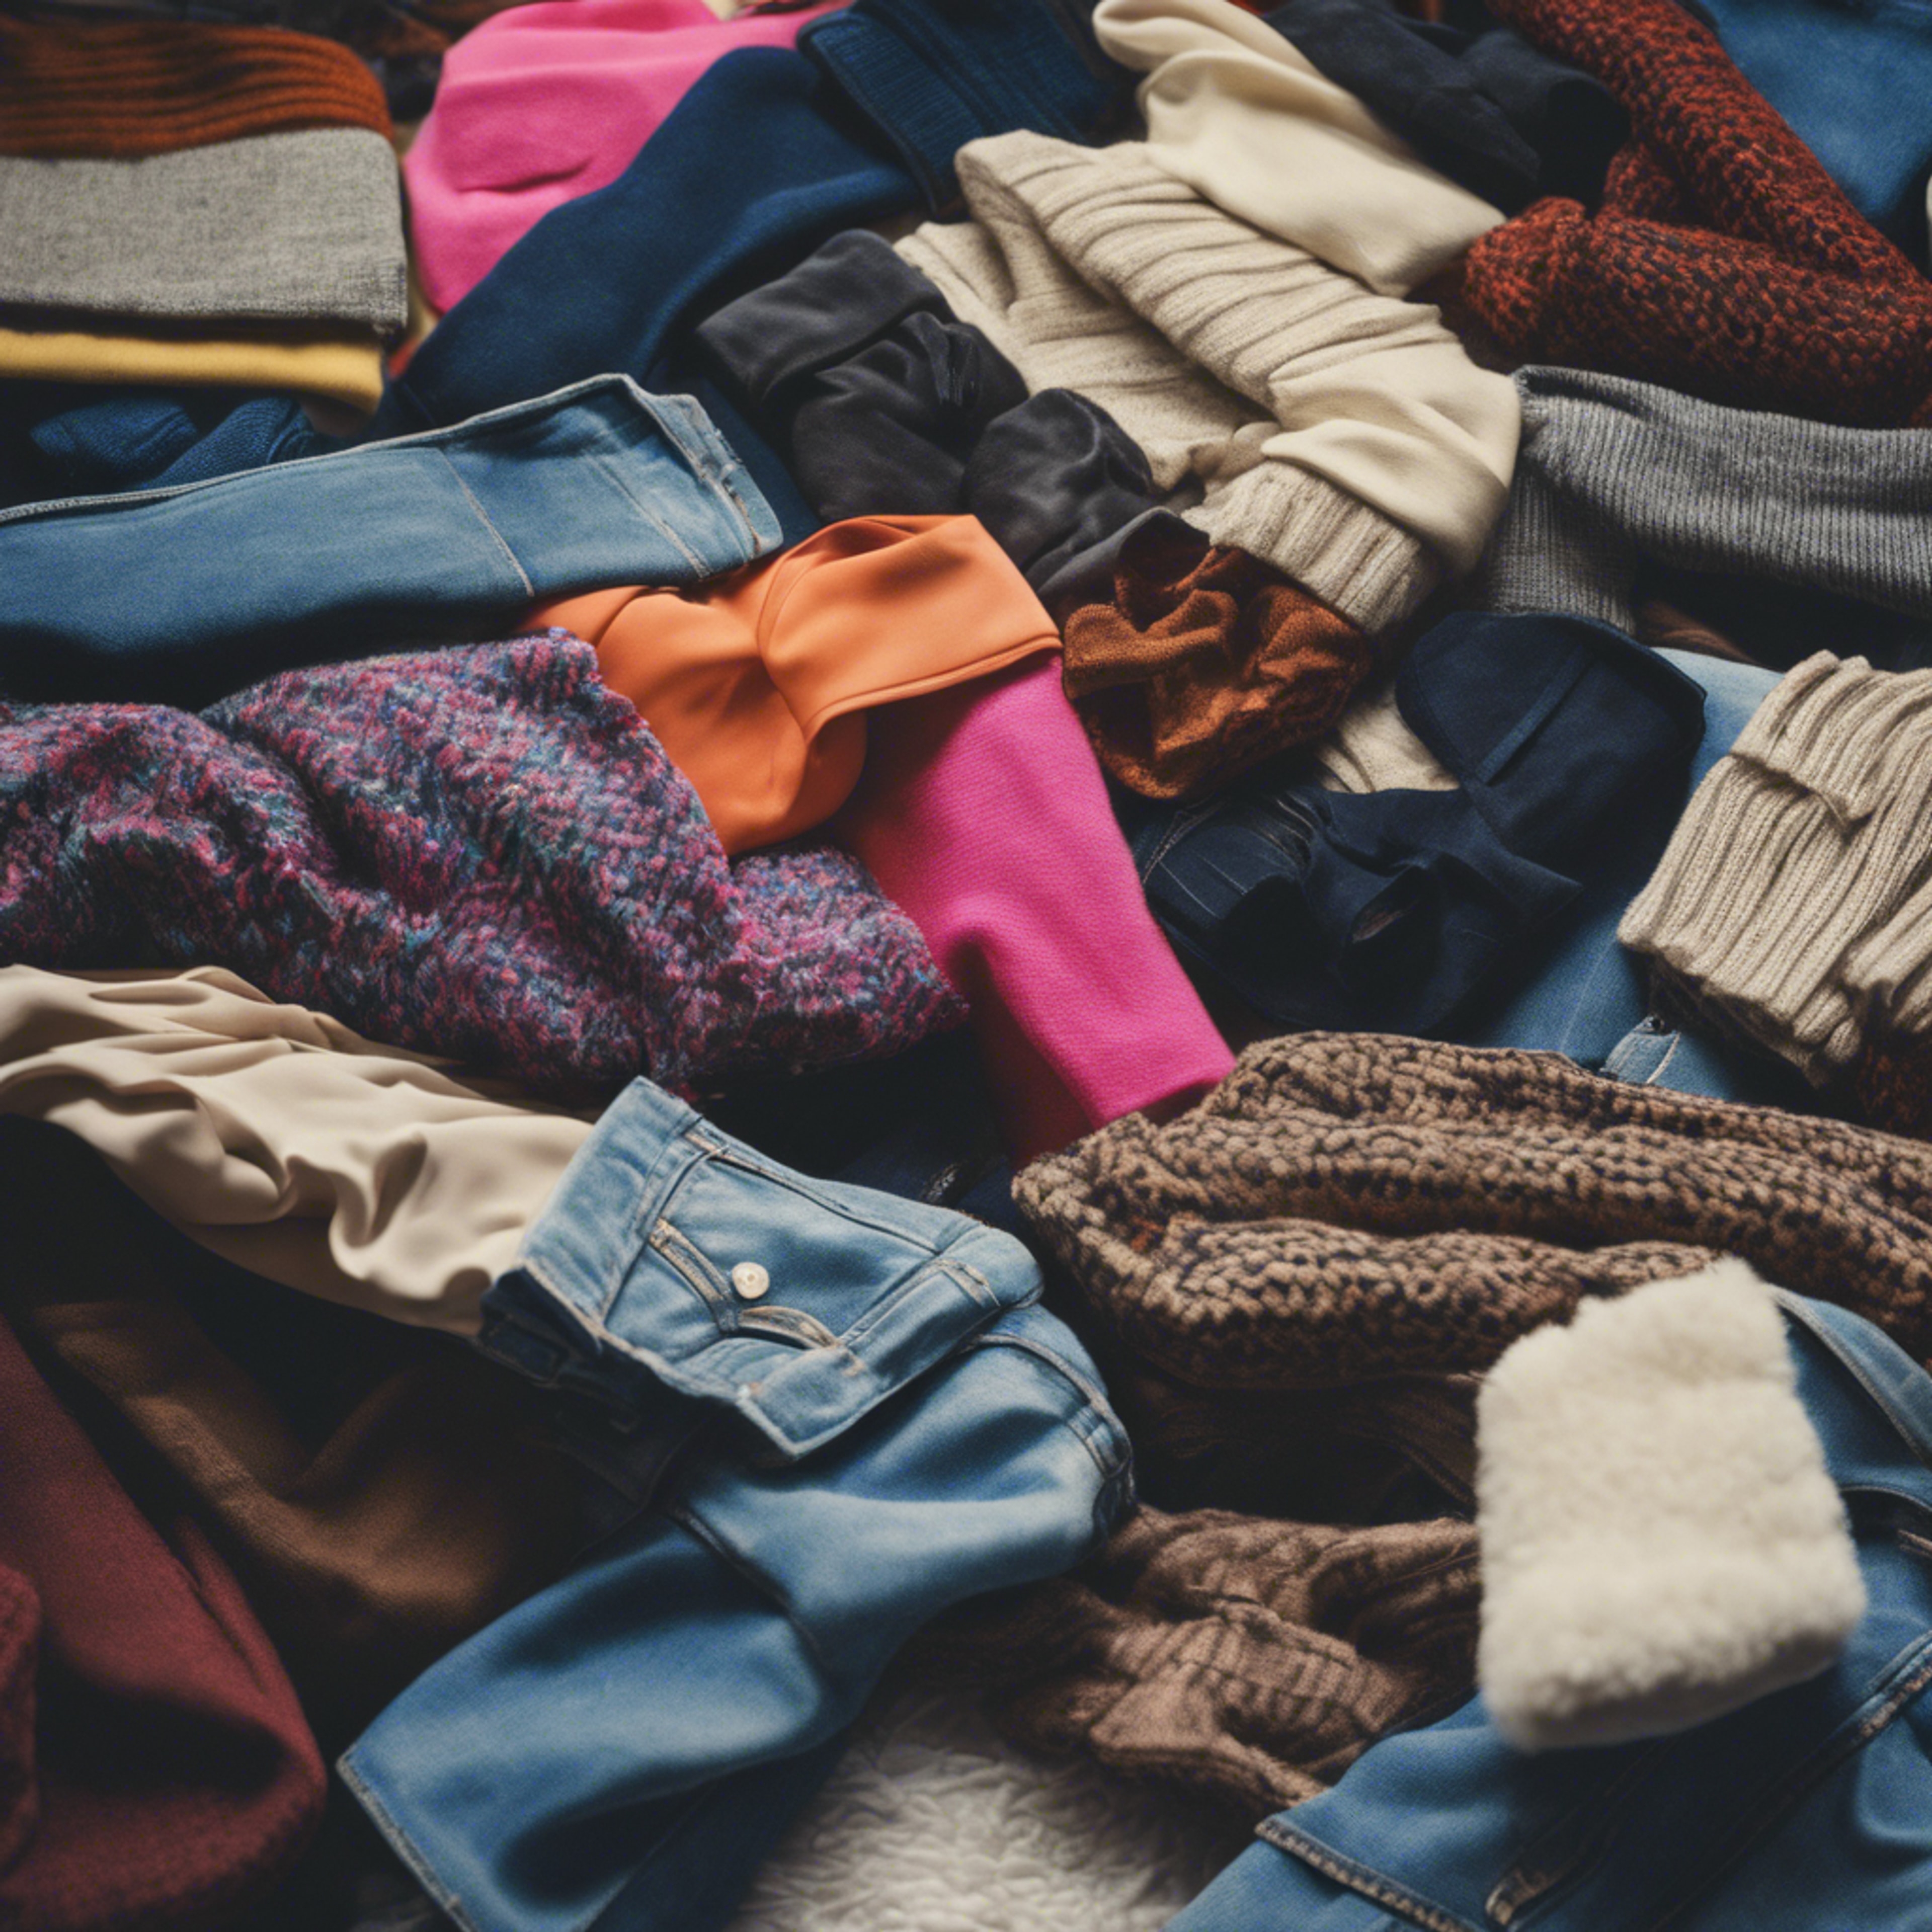 A pile of iconic 80s fashions such as leg warmers, oversized blazers, and high-waisted jeans. 벽지[dbd69f645b7844d6a4c4]